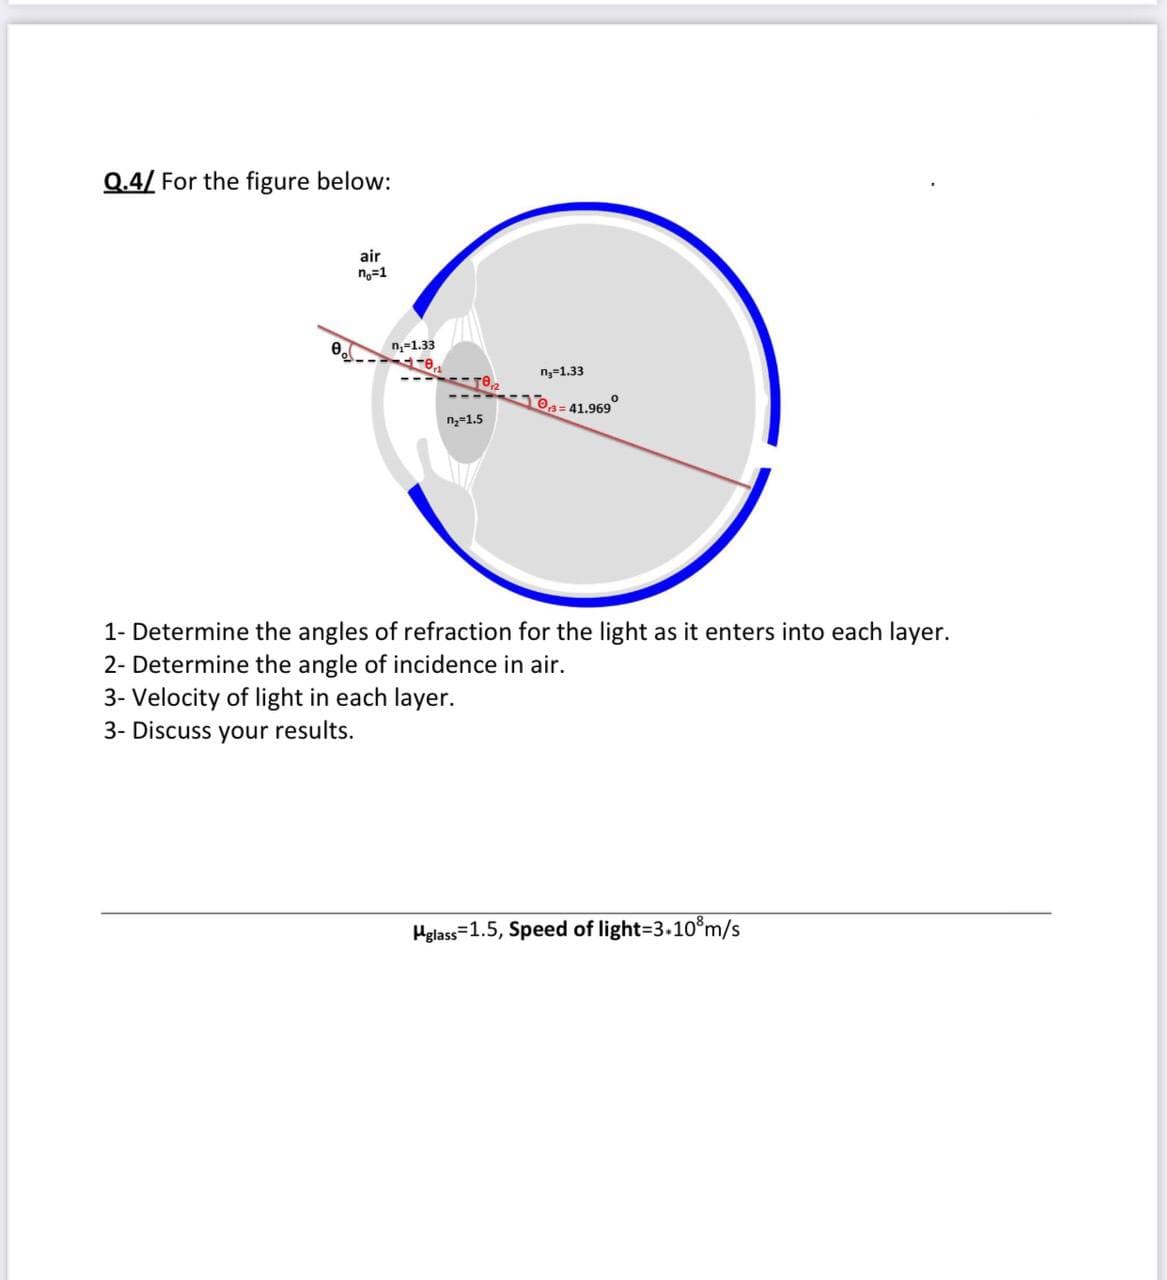 Q.4/ For the figure below:
air
ng=1
n;=1.33
n3=1.33
Os = 41,969
n;=1.5
1- Determine the angles of refraction for the light as it enters into each layer.
2- Determine the angle of incidence in air.
3- Velocity of light in each layer.
3- Discuss your results.
Helass=1.5, Speed of light=3.10°m/s
